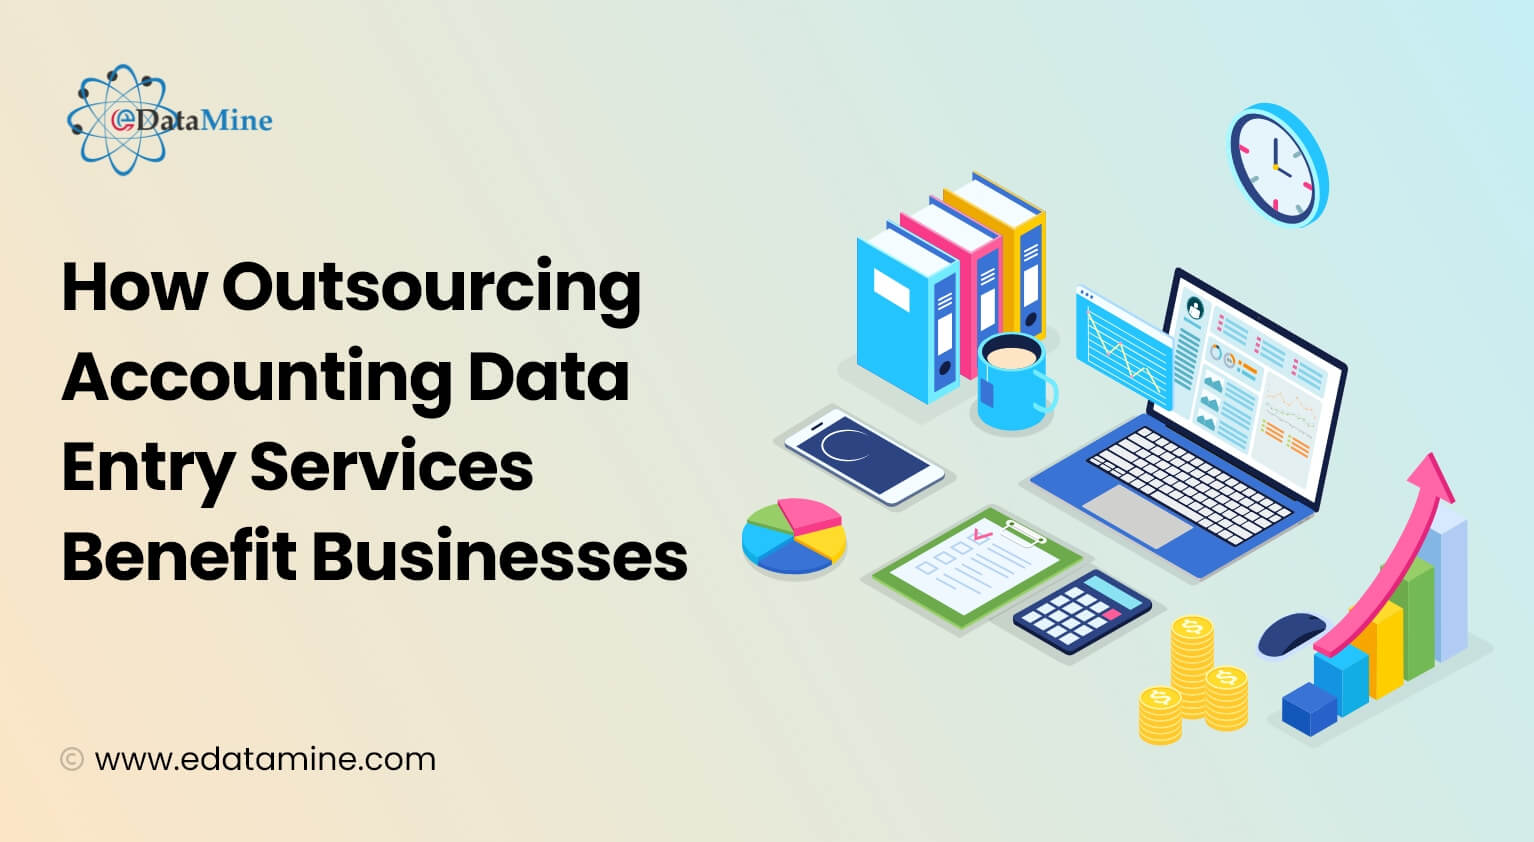 How Outsourcing Accounting Data Entry Services Benefit Businesses